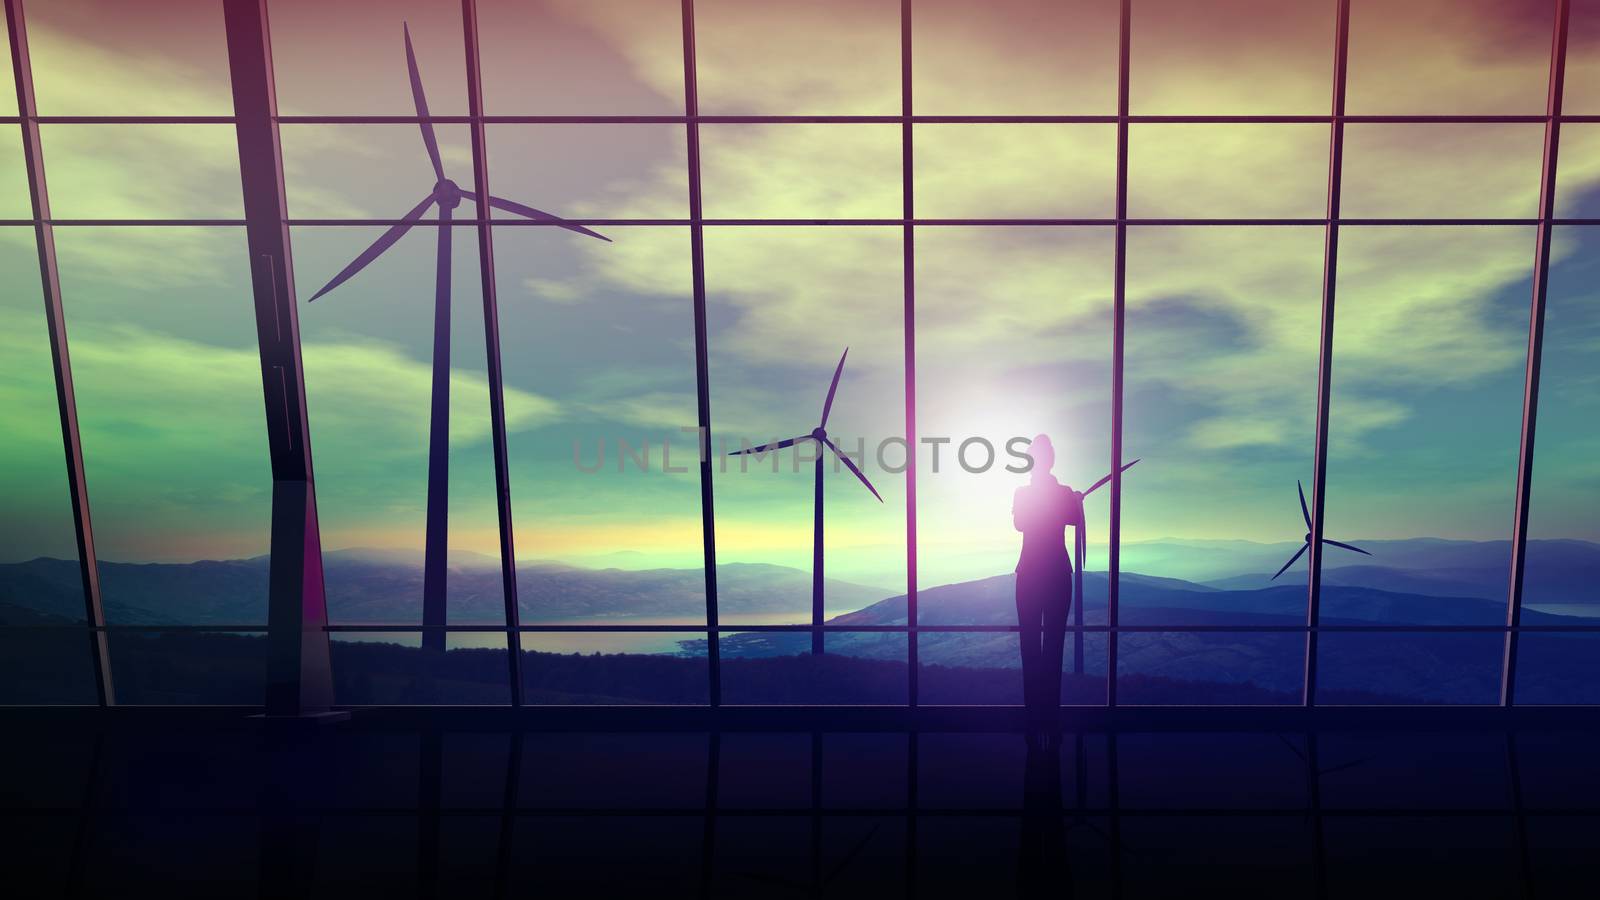 A silhouette of a business woman is standing against an office window overlooking the wind turbines.